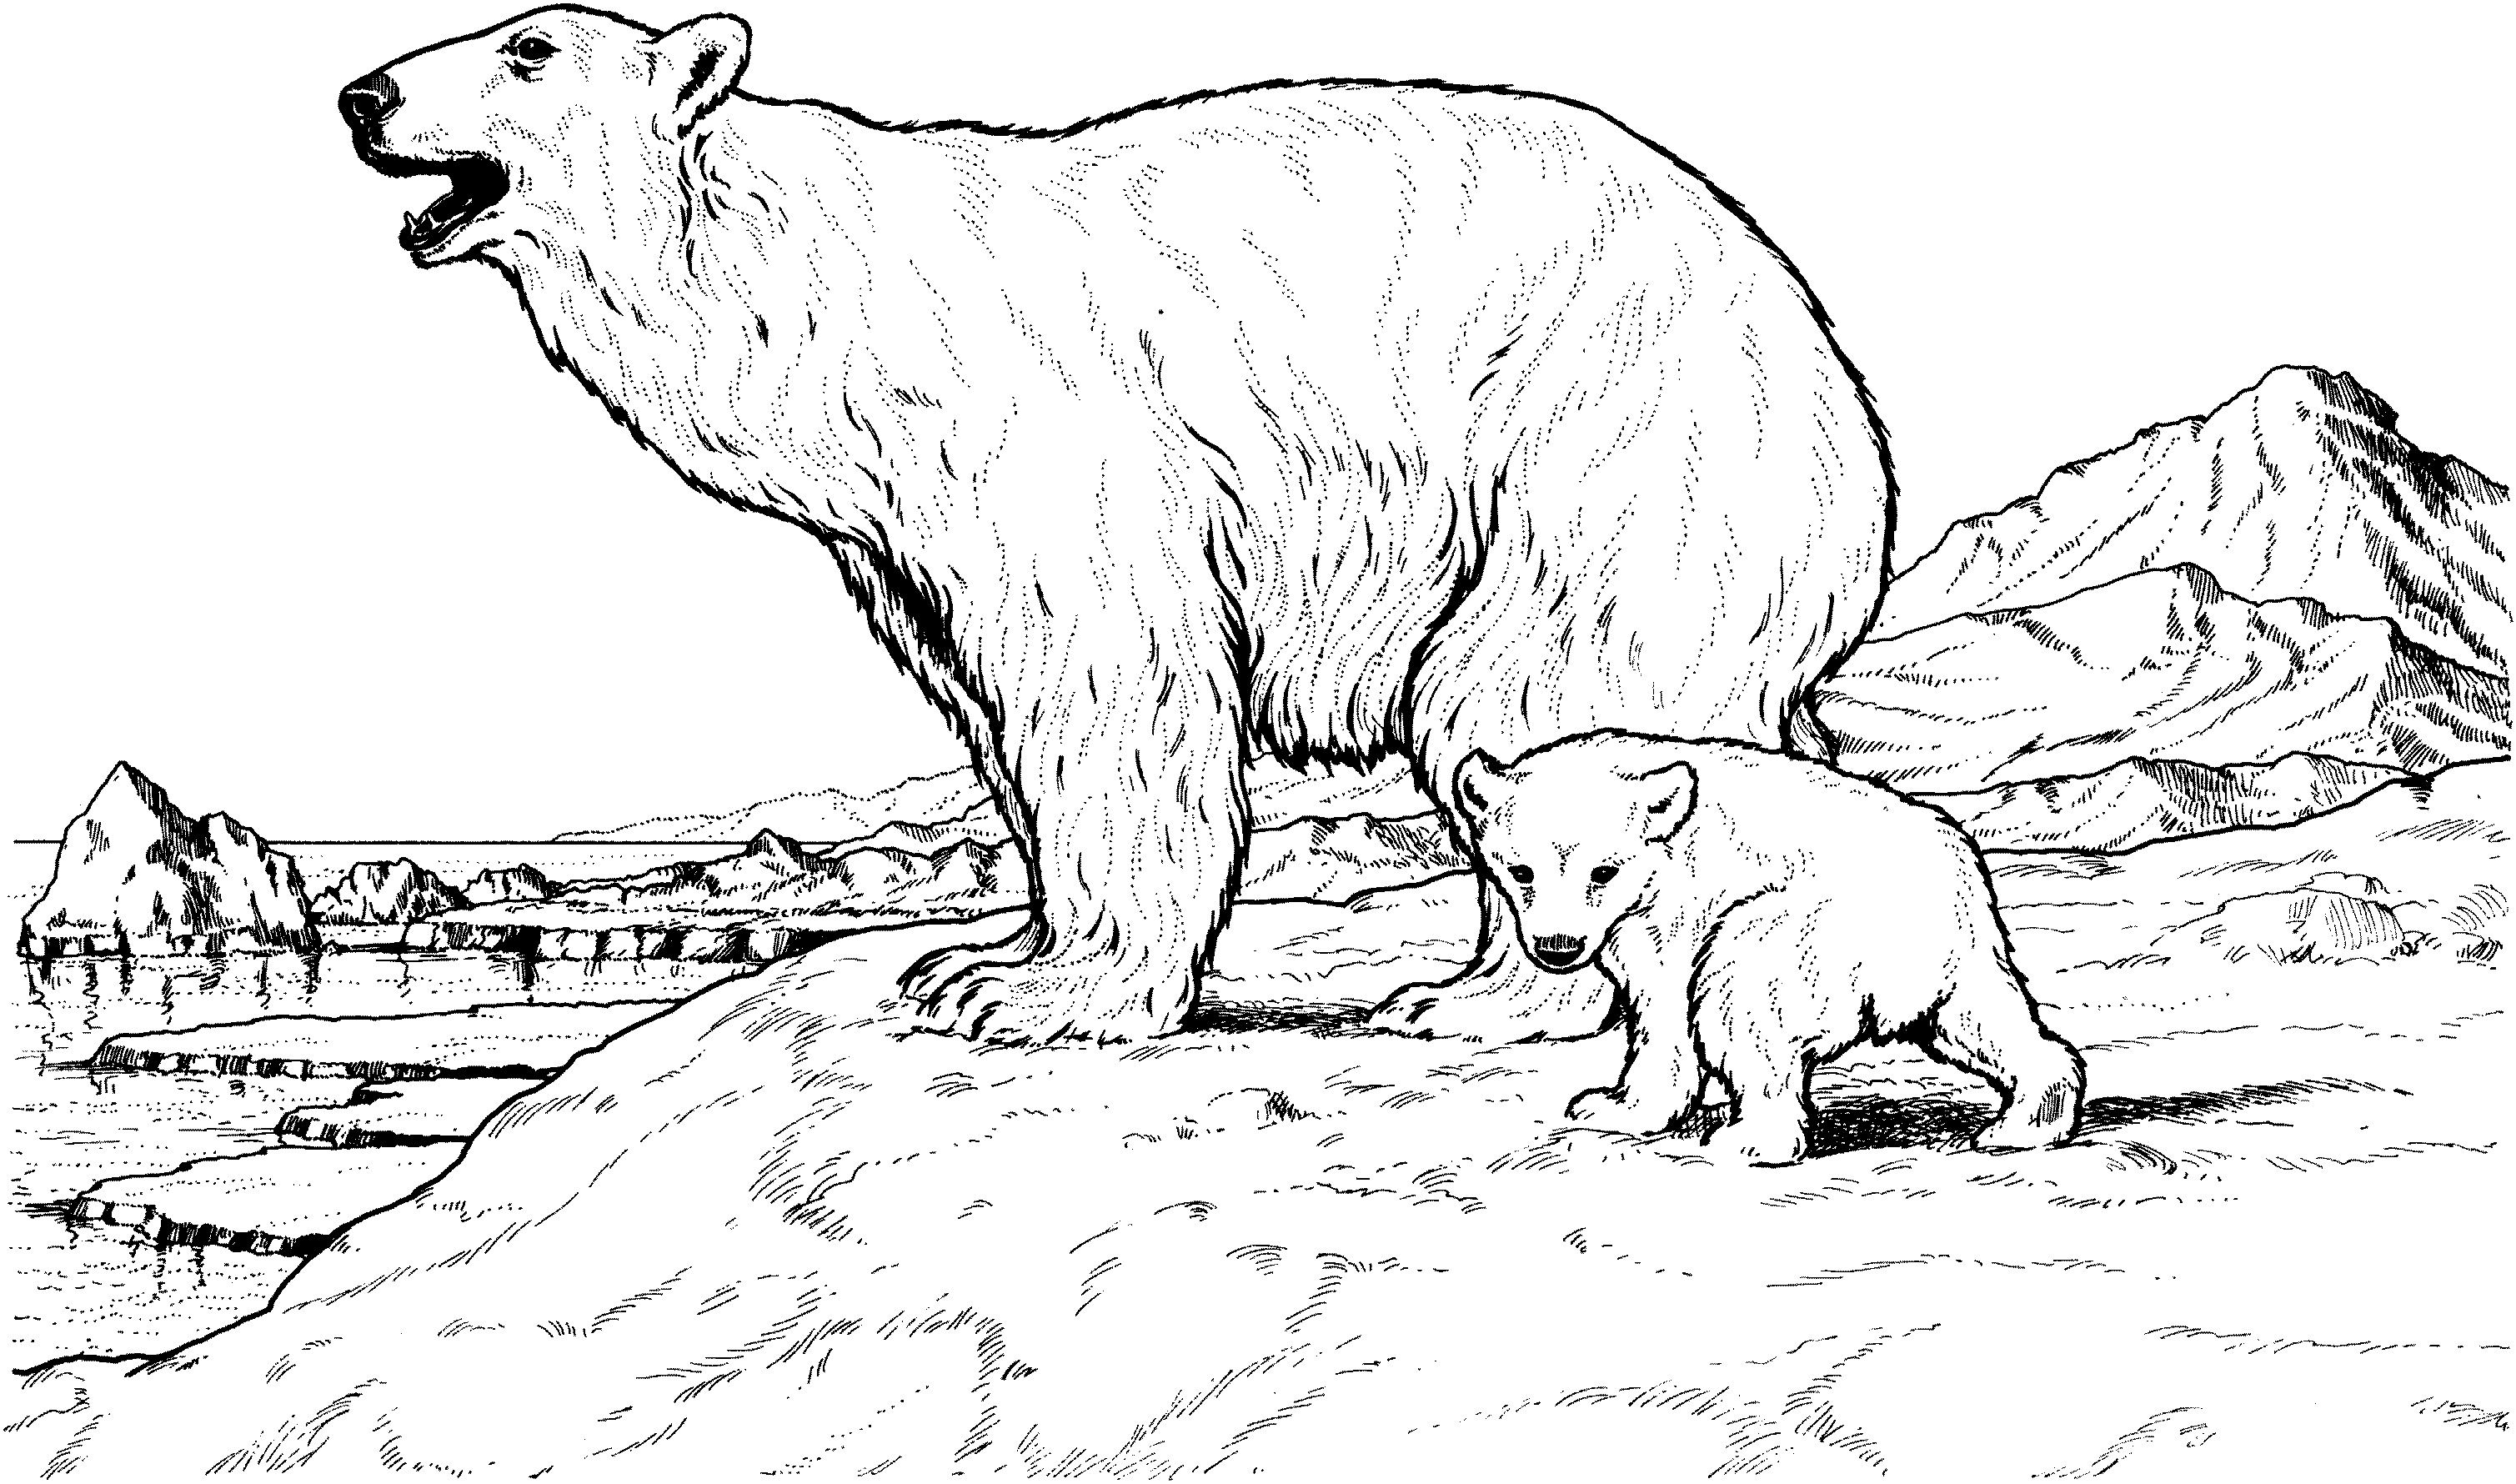 free-printable-polar-bear-coloring-pages-for-kids